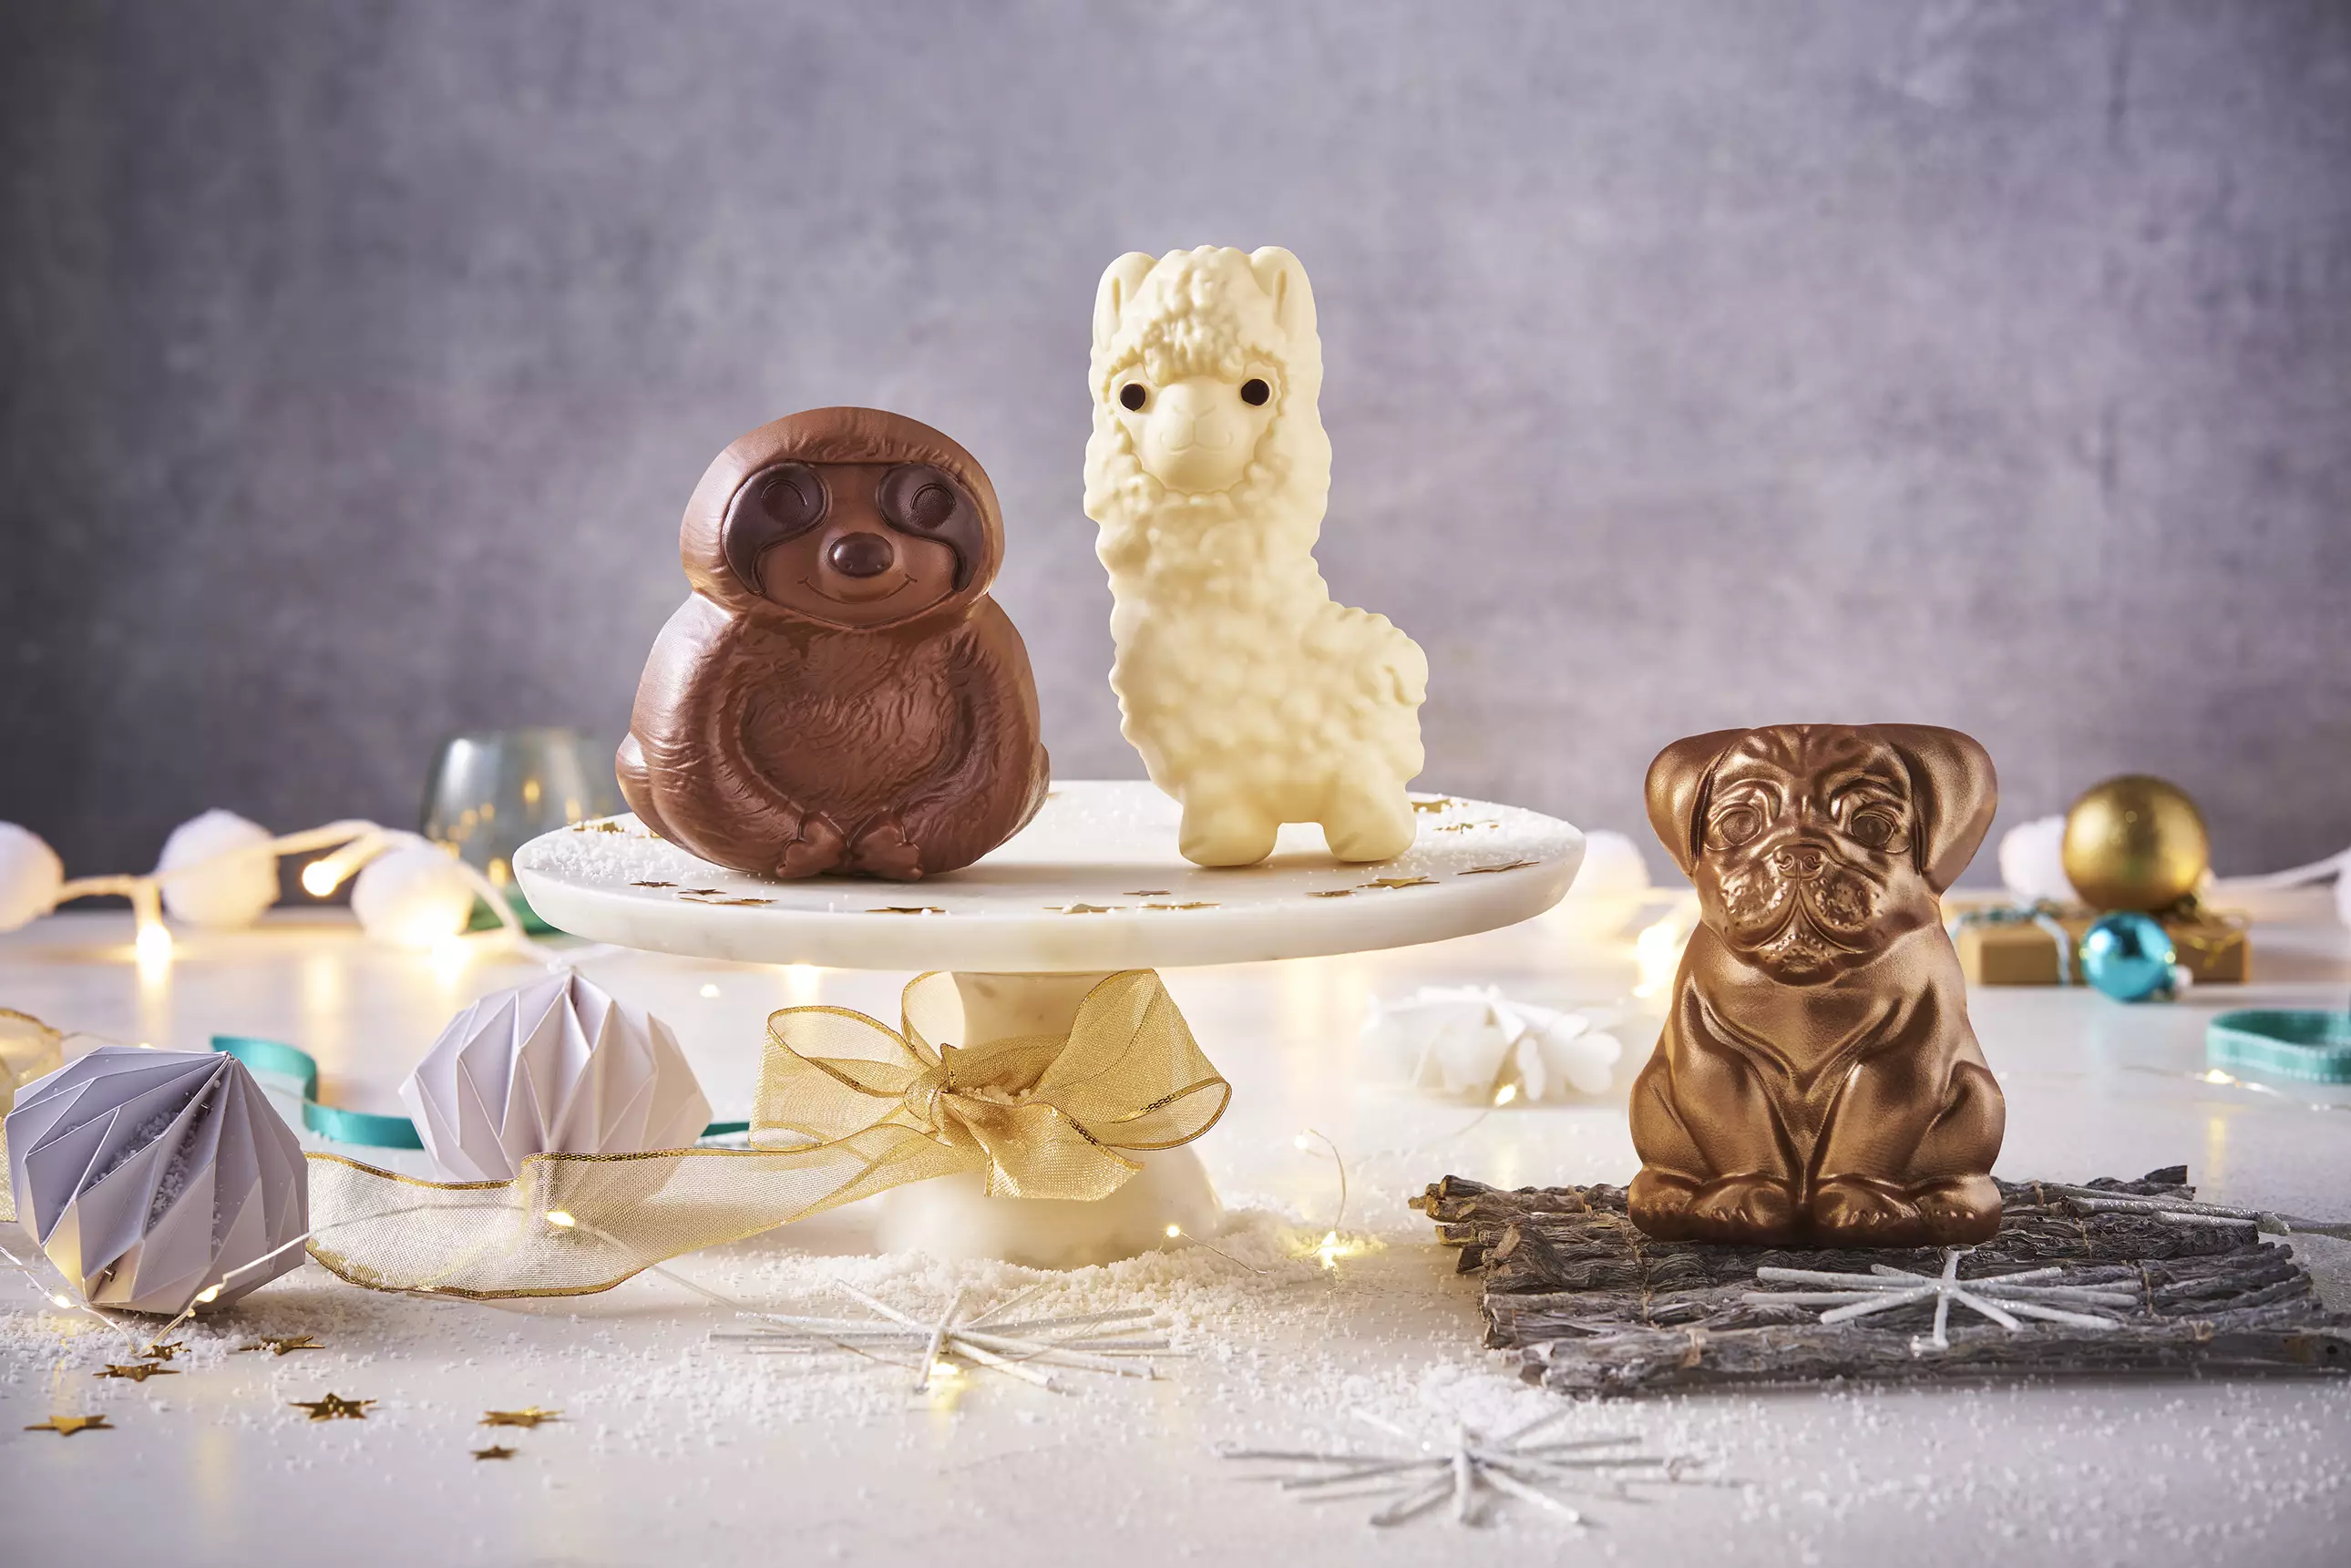 A chocolate llama and sloth will also be available alongside the shimmery pug for £5 each.